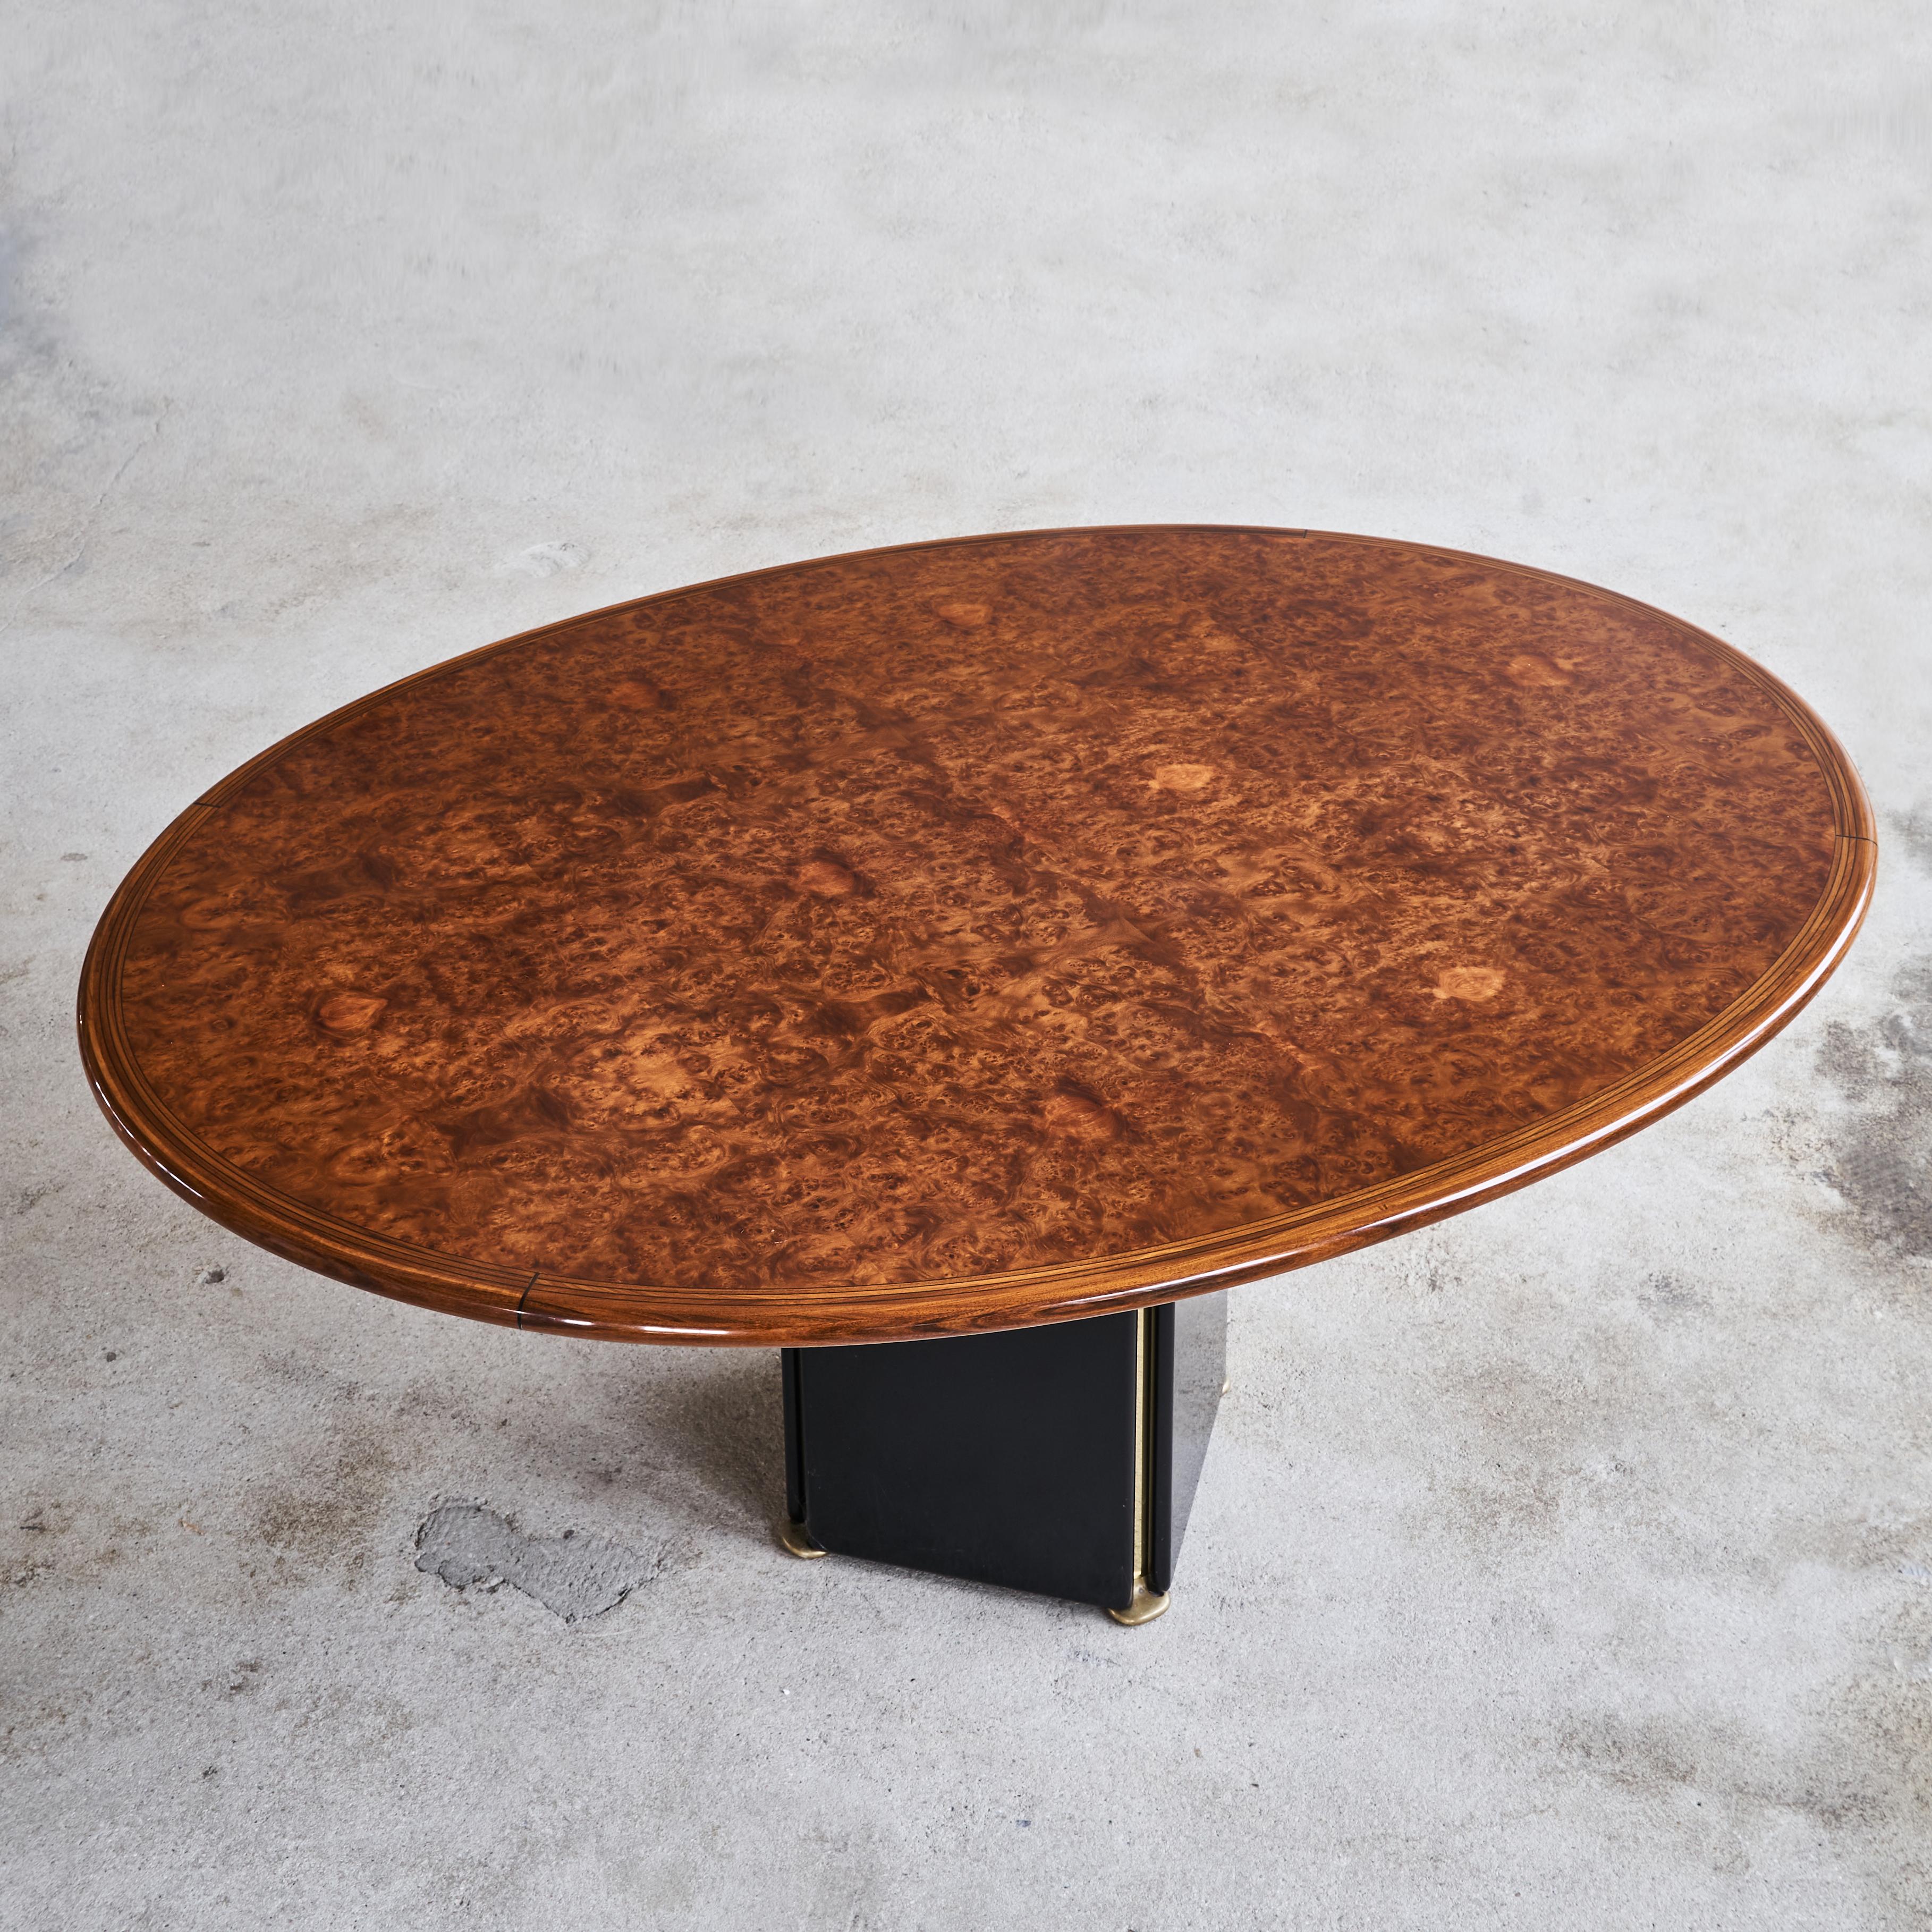 Fantastic oval shaped dining table in burl wood, walnut and brass by Afra & Tobia Scarpa. Classical in proportions and beautifully crafted with high attention to detail. A well known design by the famous Scarpa designer couple, made for Maxalto –